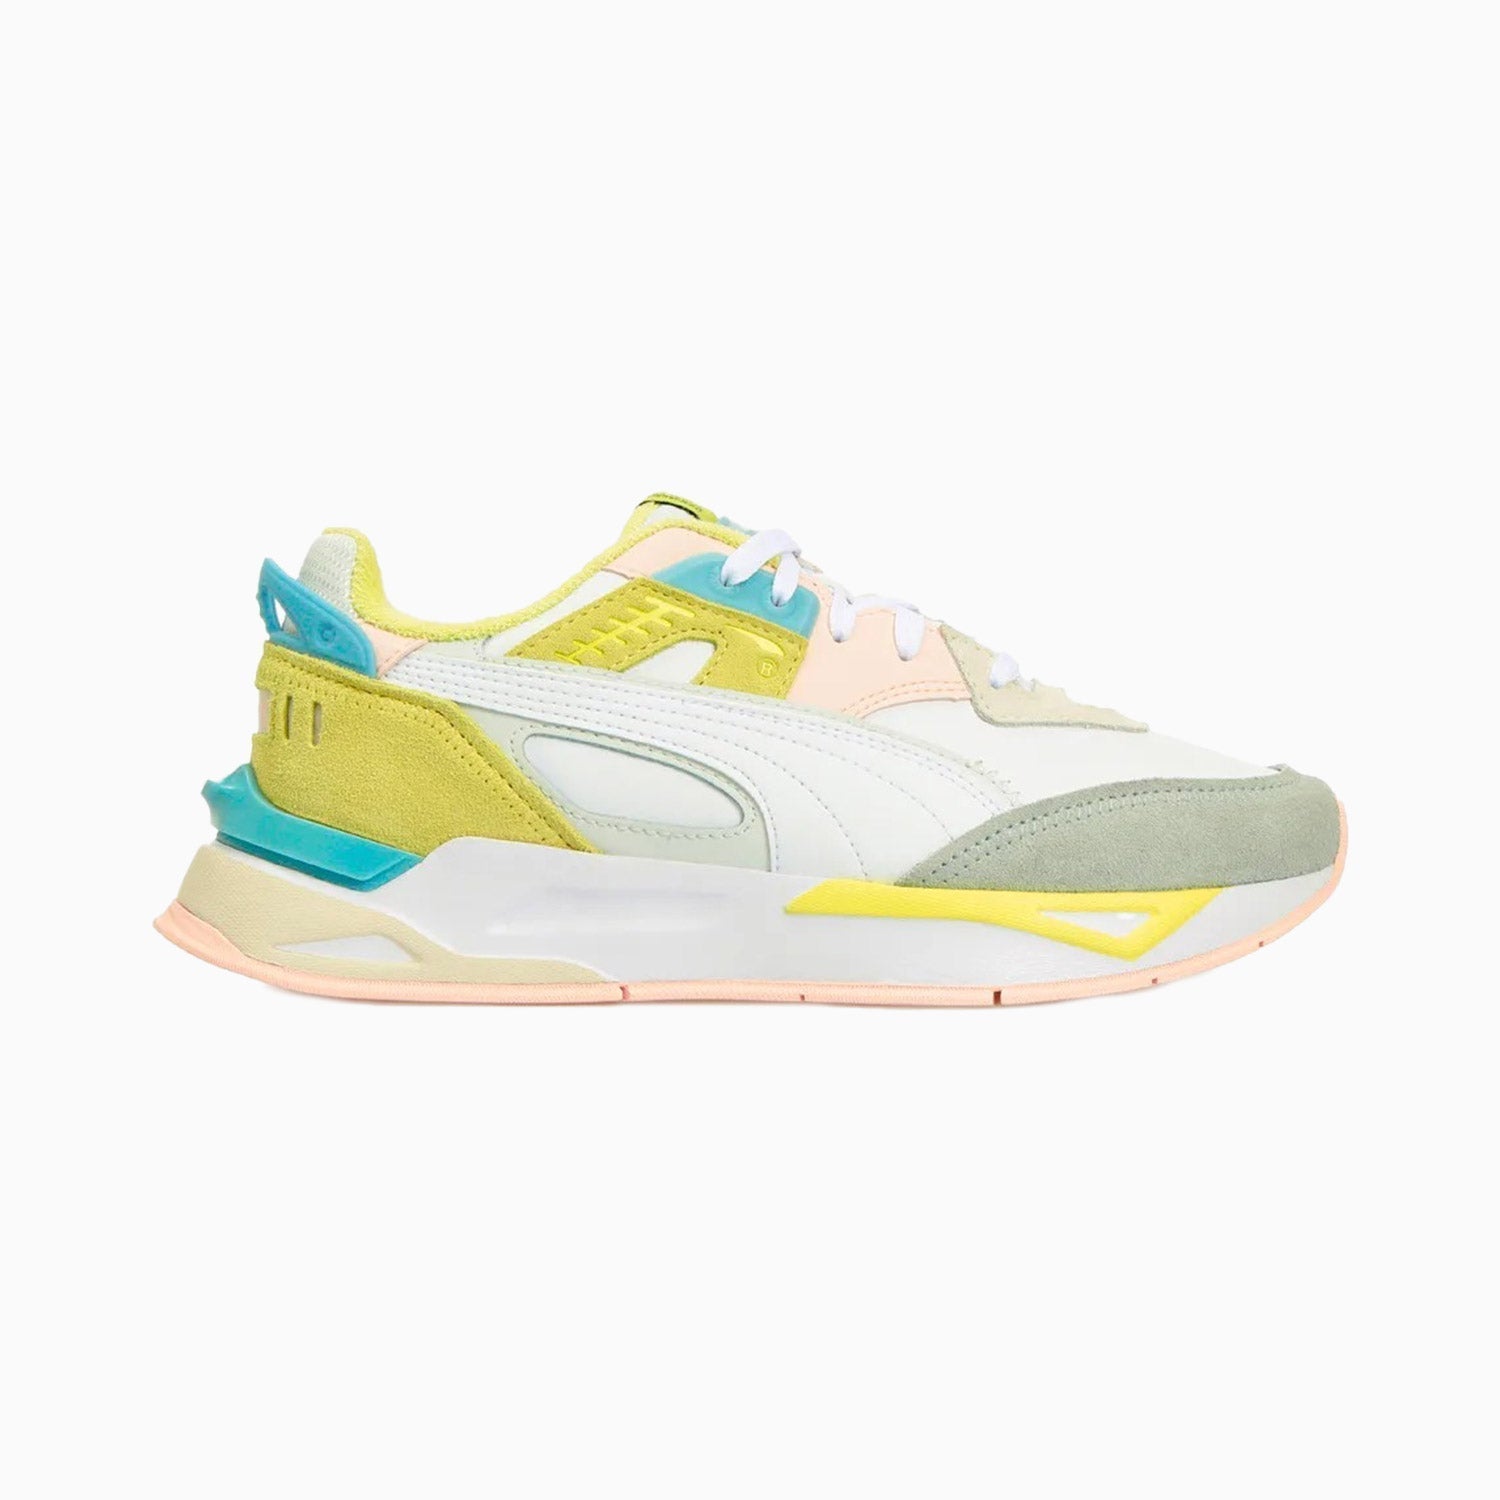 Puma Women's Mirage Sport Pastel Trainer Shoes - Color: White lotus - Tops and Bottoms USA -